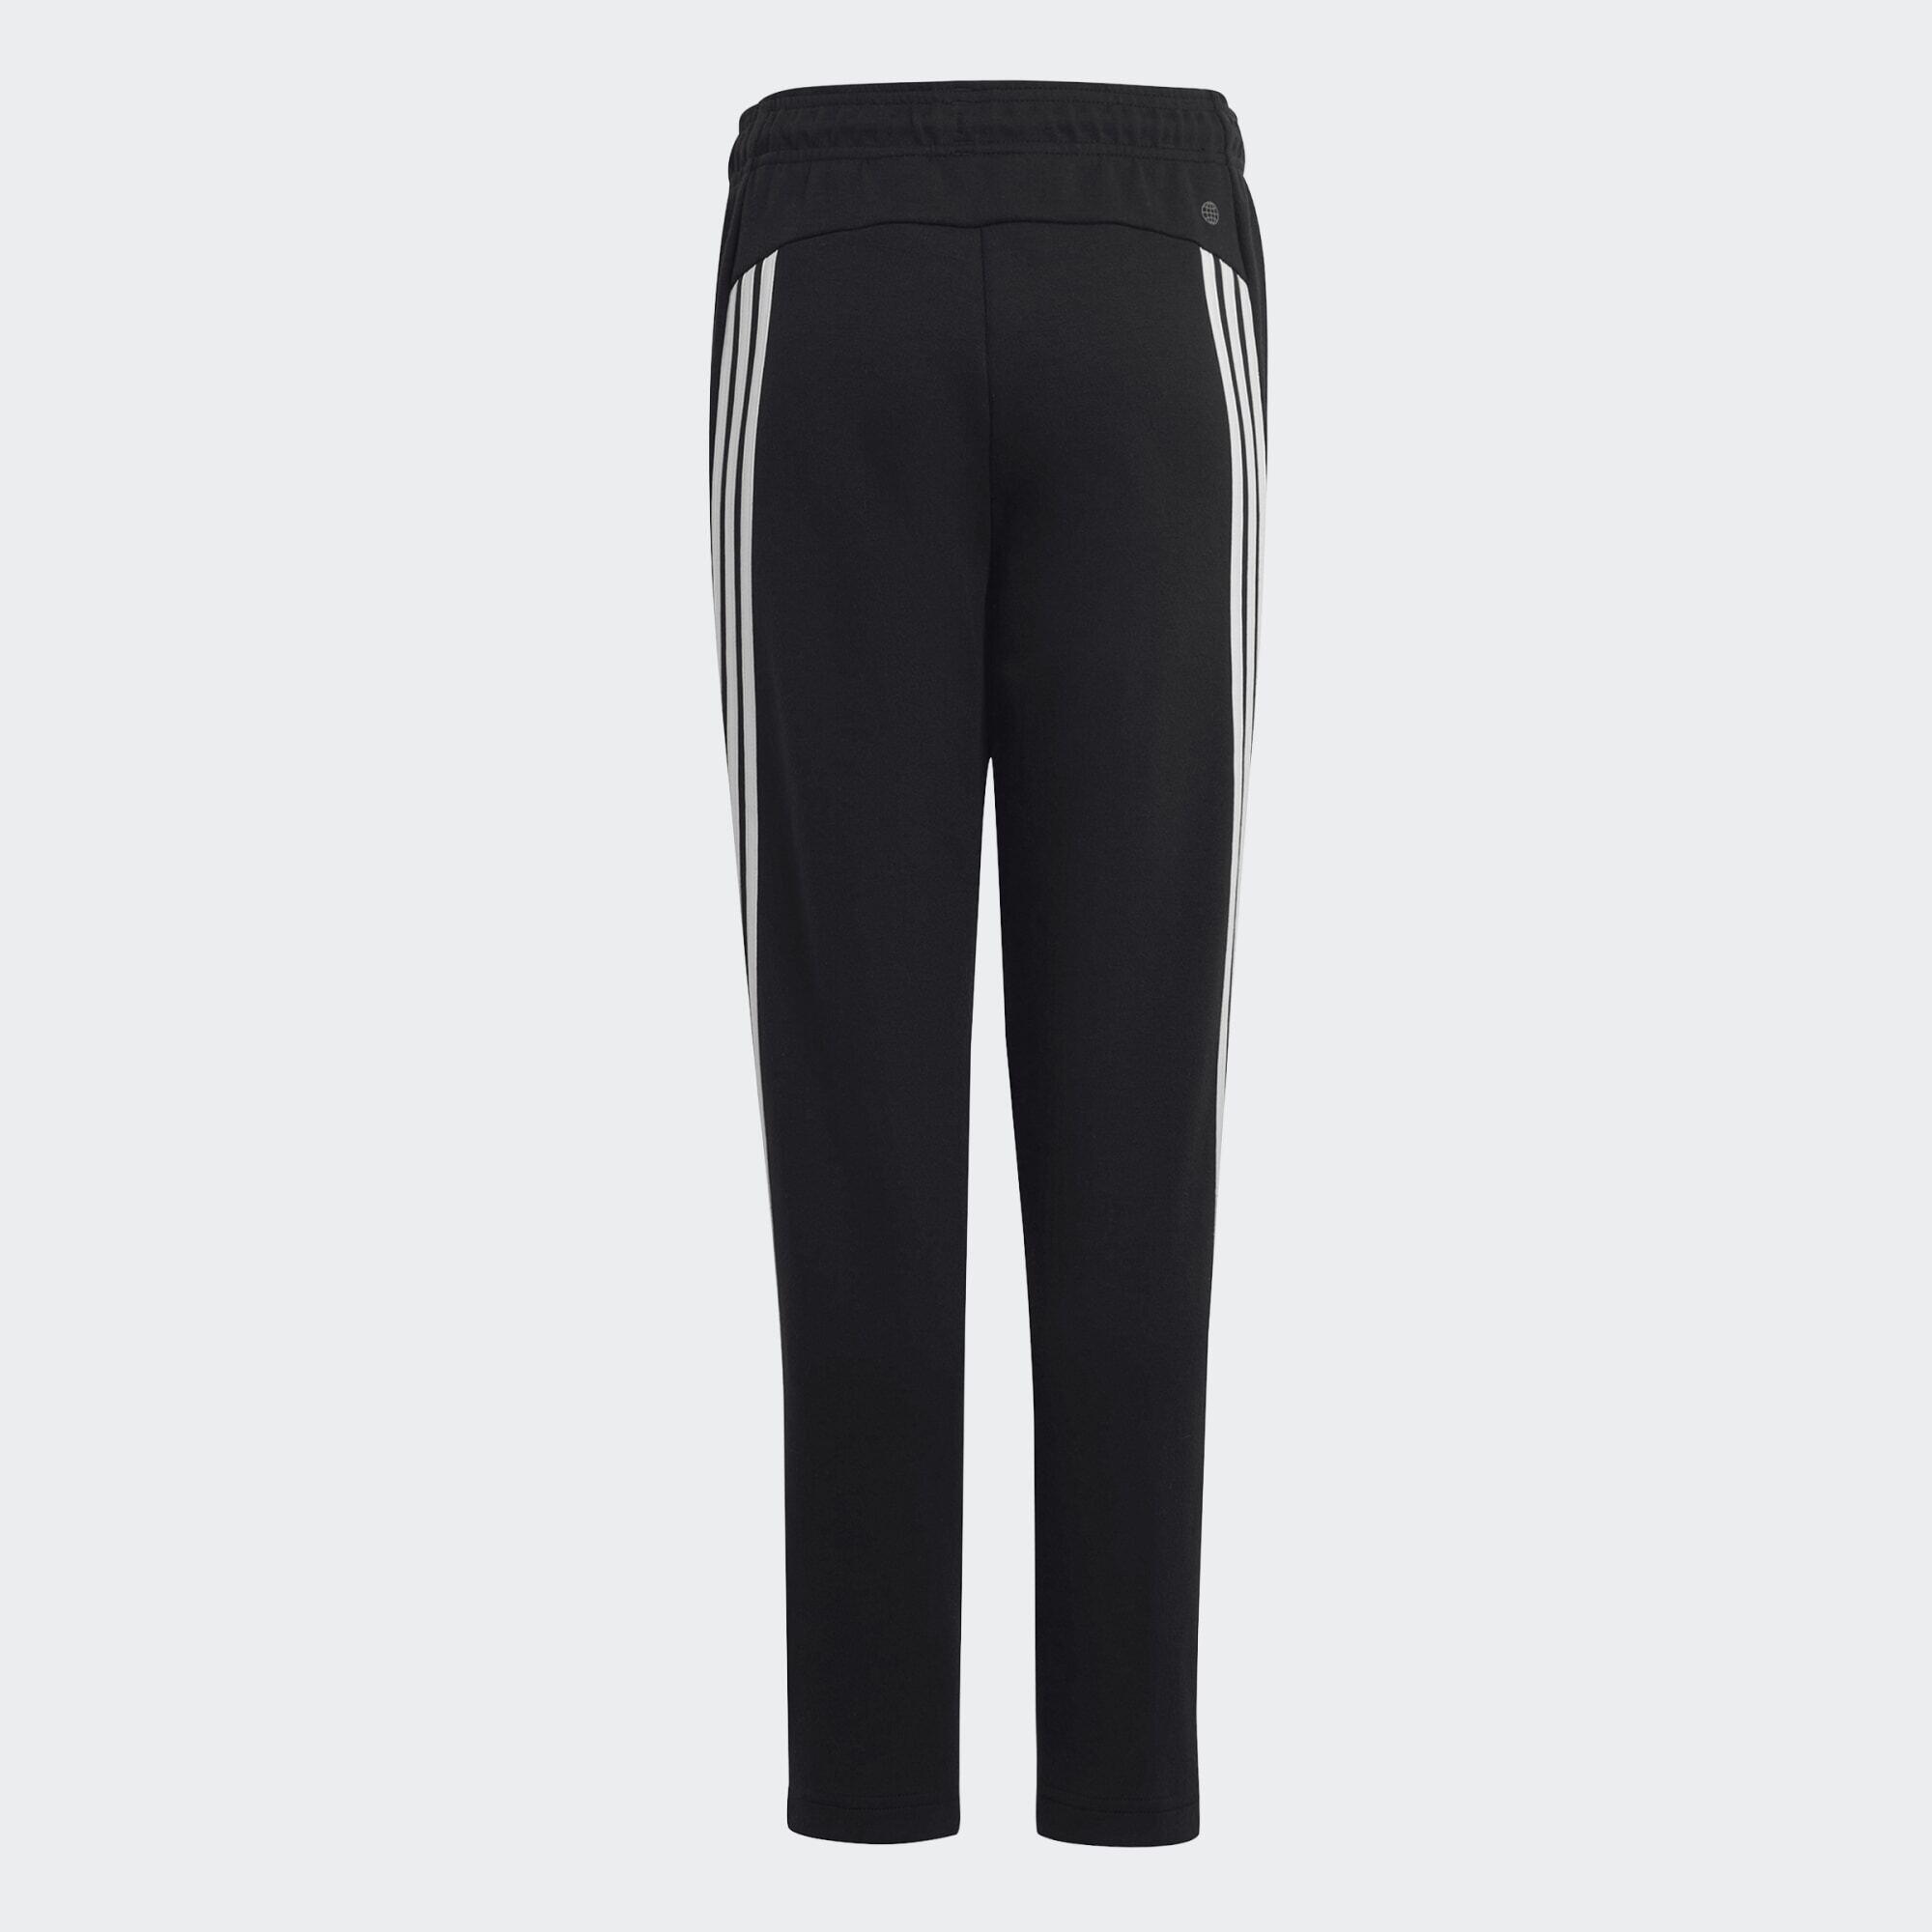 Future Icons 3-Stripes Ankle-Length Pants 6/7